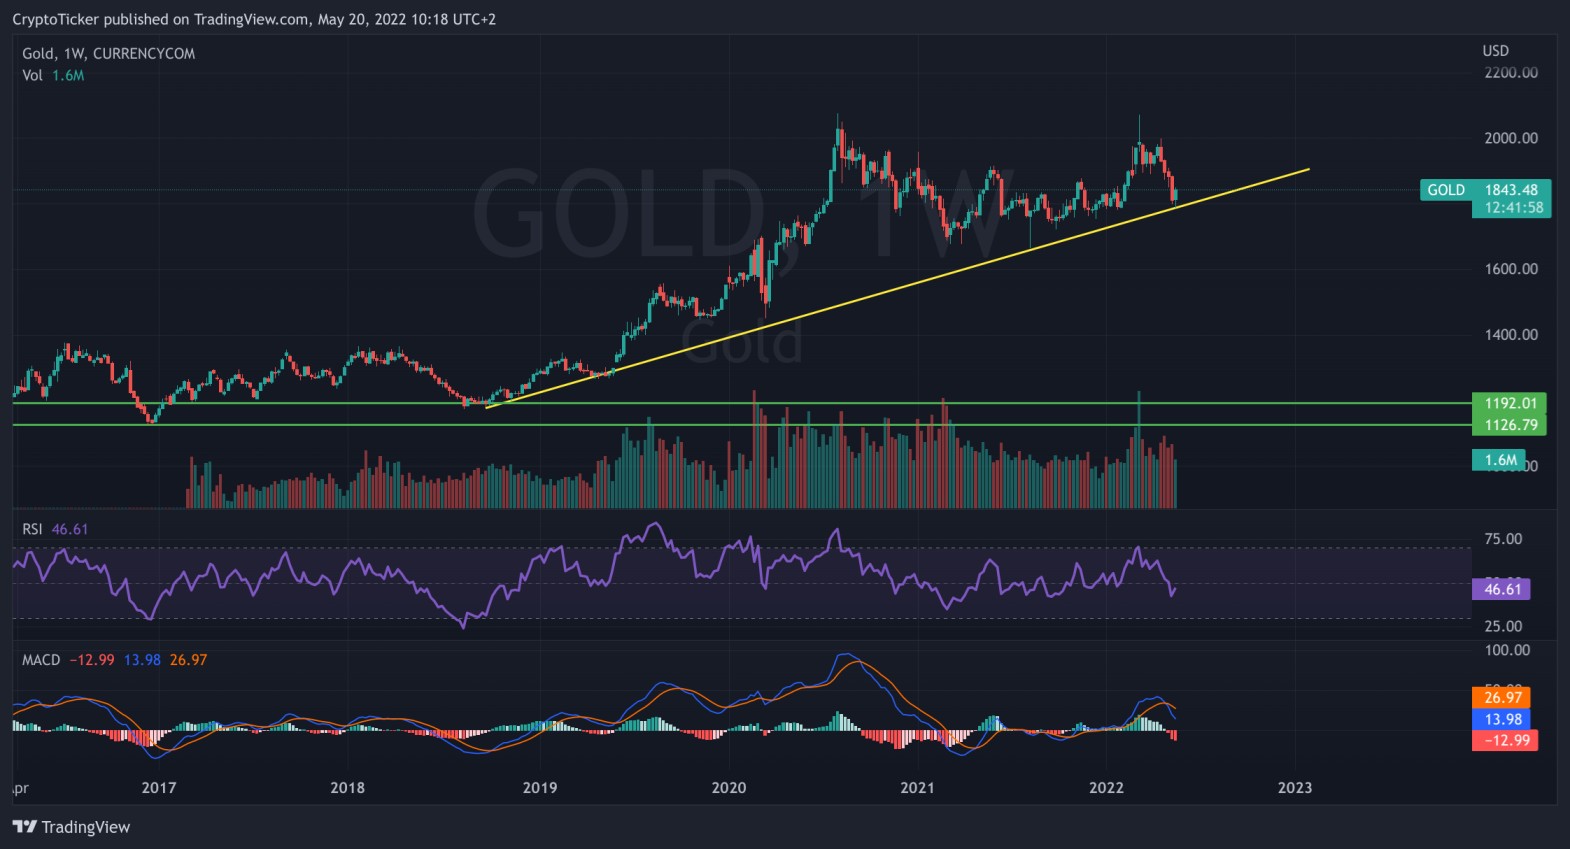 GOLD 1-week chart in USD showing the increase in prices